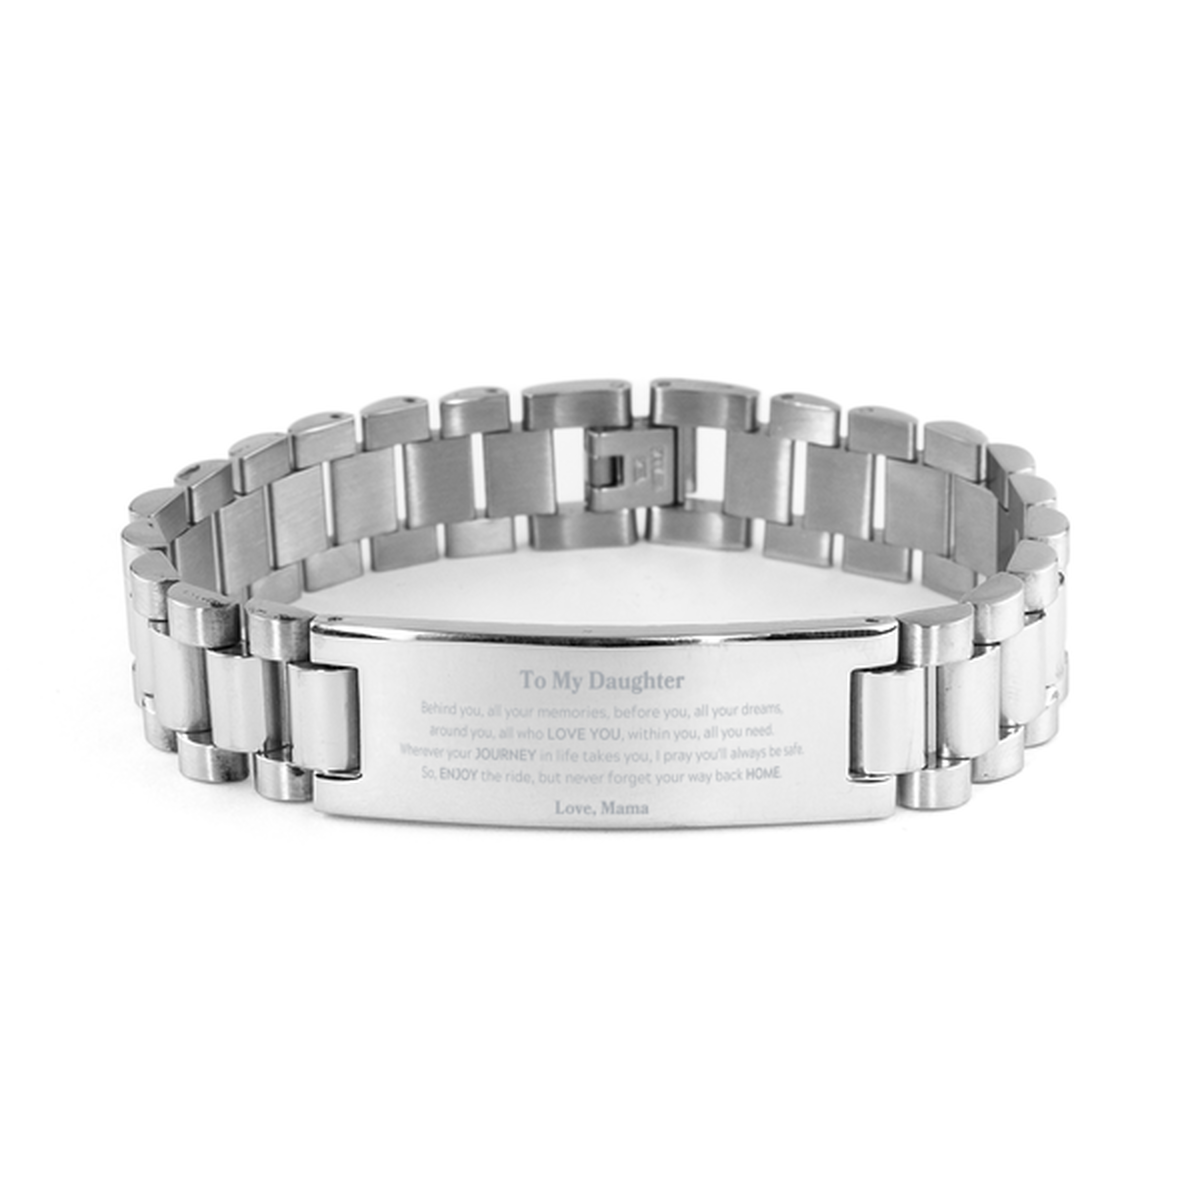 To My Daughter Graduation Gifts from Mama, Daughter Ladder Stainless Steel Bracelet Christmas Birthday Gifts for Daughter Behind you, all your memories, before you, all your dreams. Love, Mama